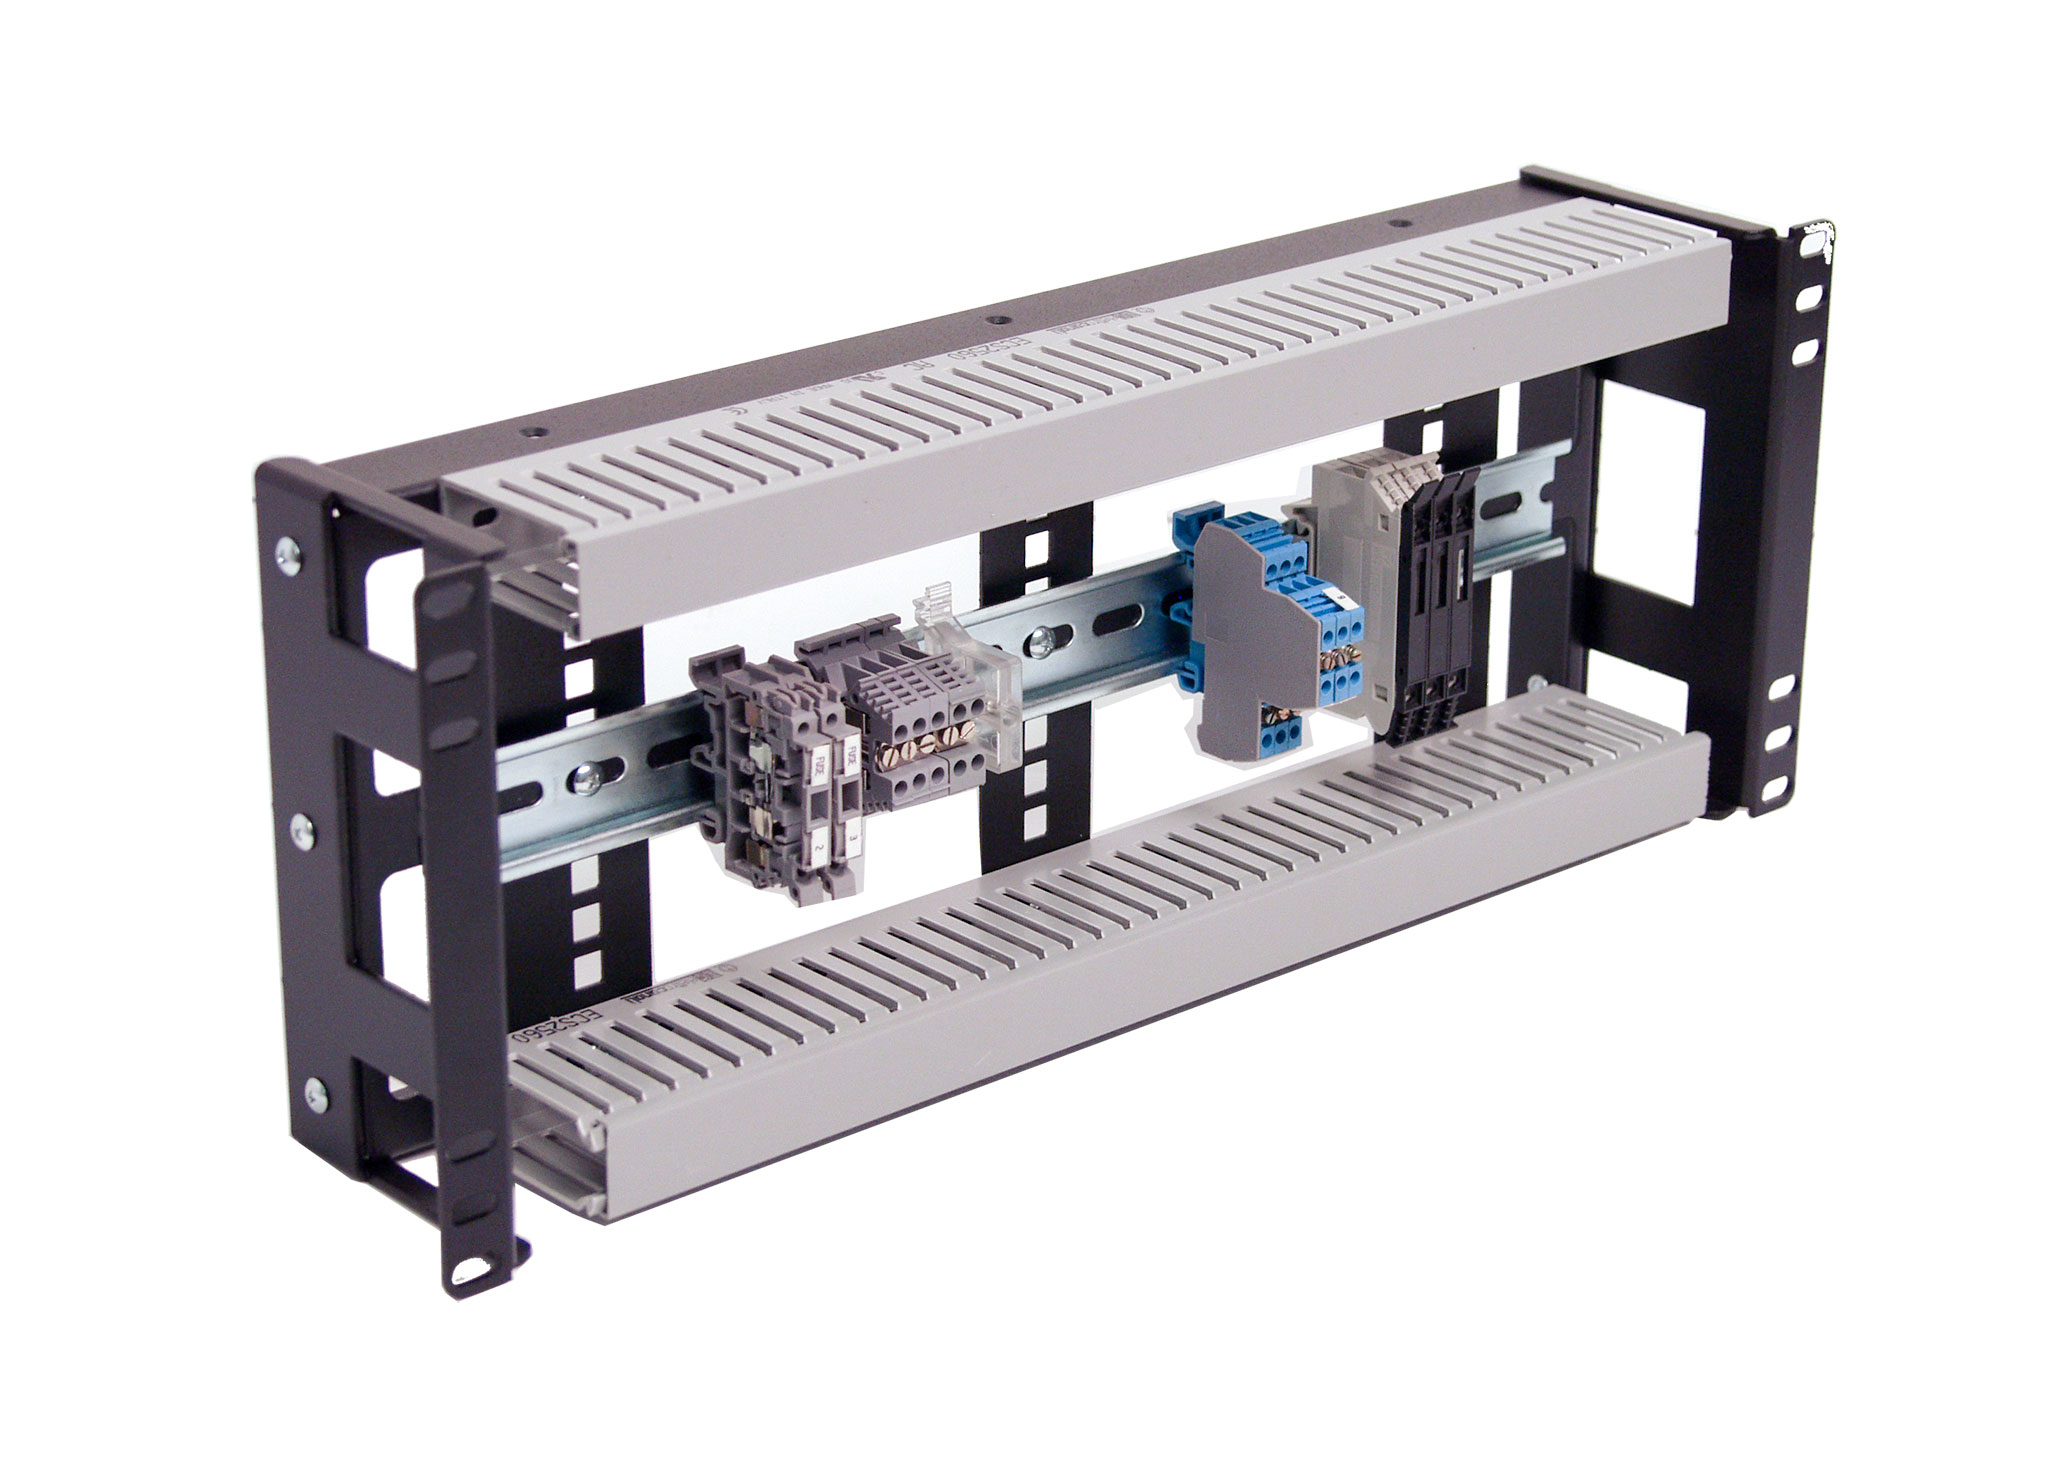 IRP1023D 2U Rackmount 3.78 inch Low Profile DIN Rail Panel for ...